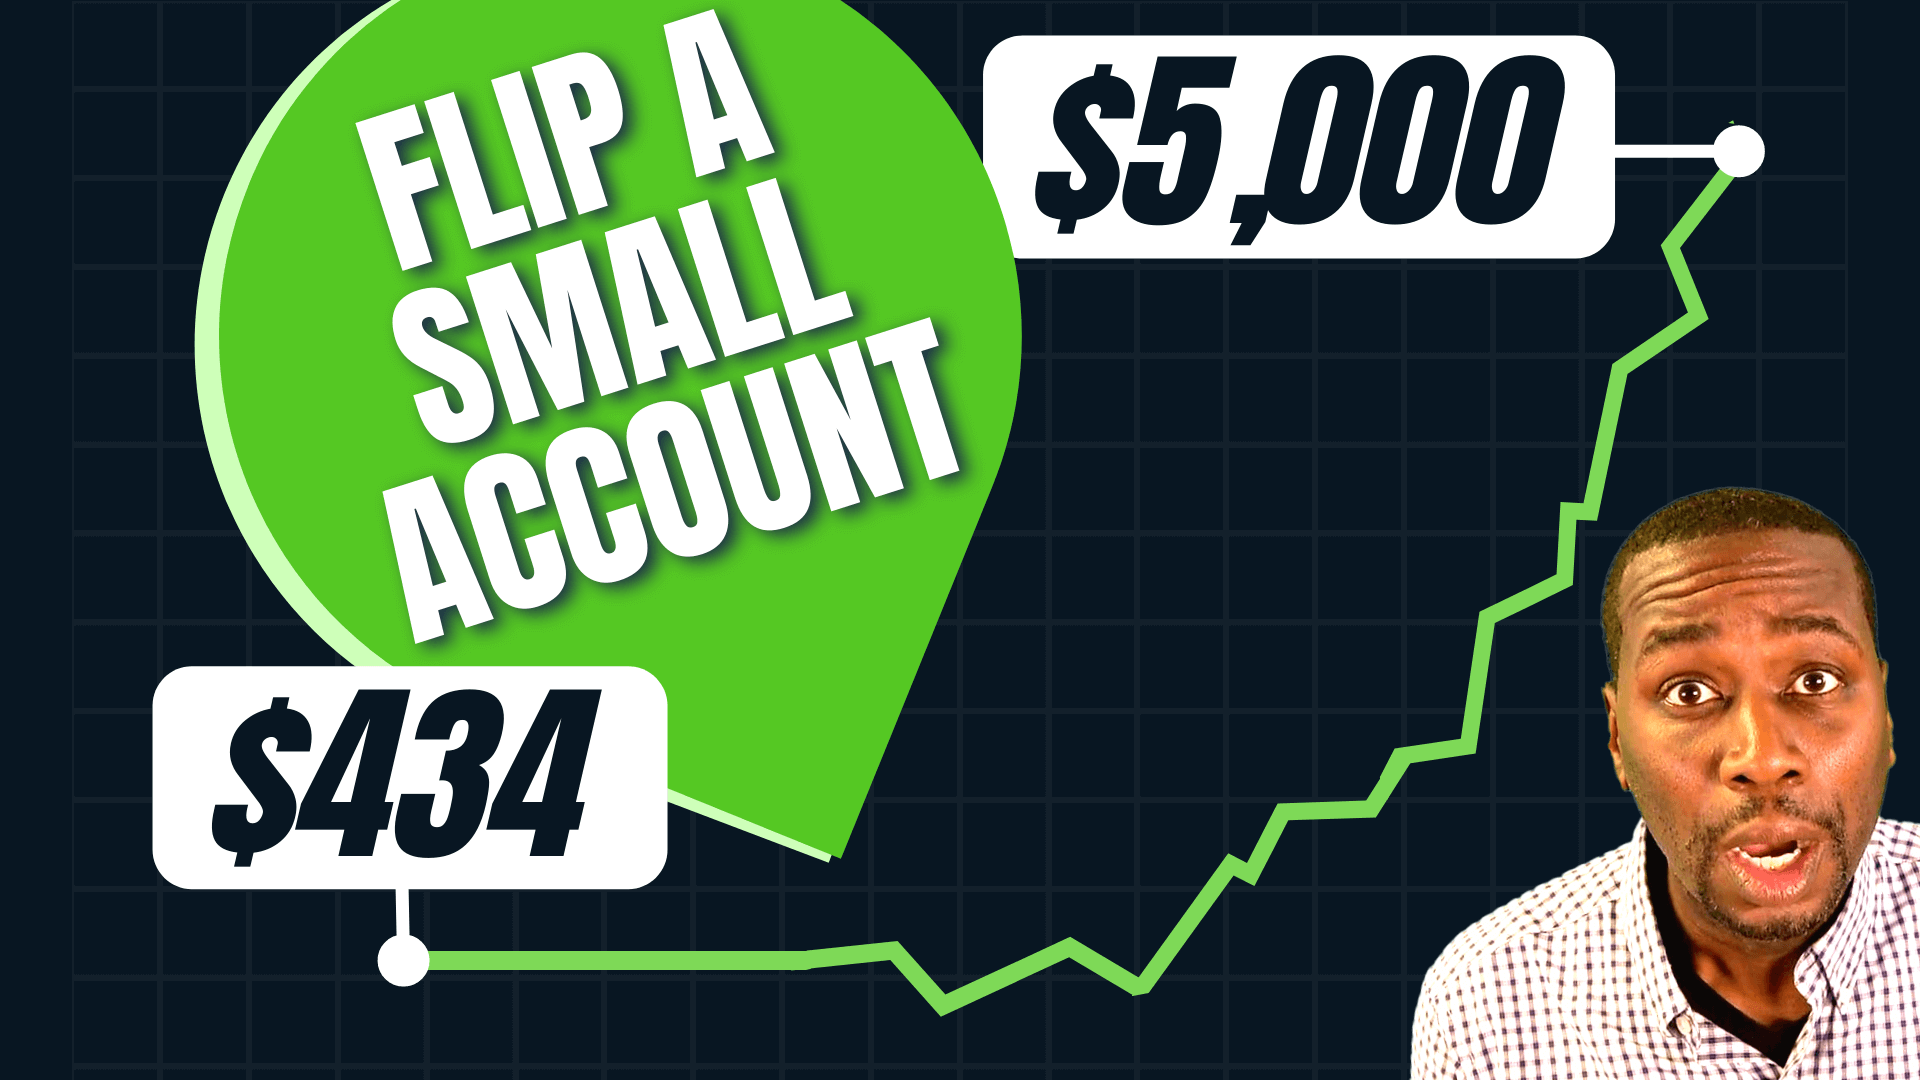 EP 093: How to Flip a Small Account: A Real-Life Story